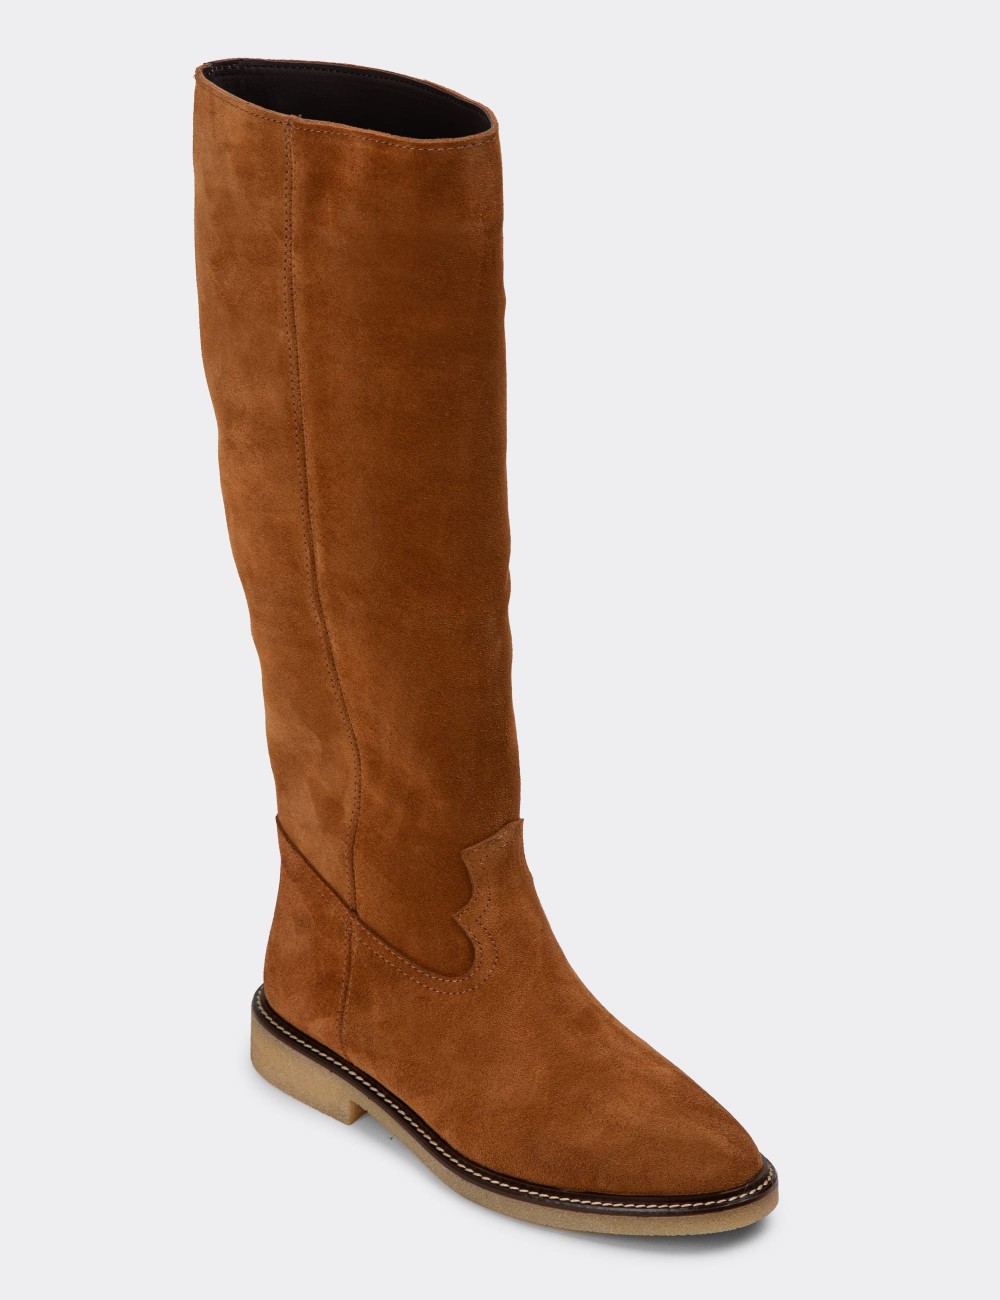 Tan Suede Leather Boots - 01968ZTBAC01